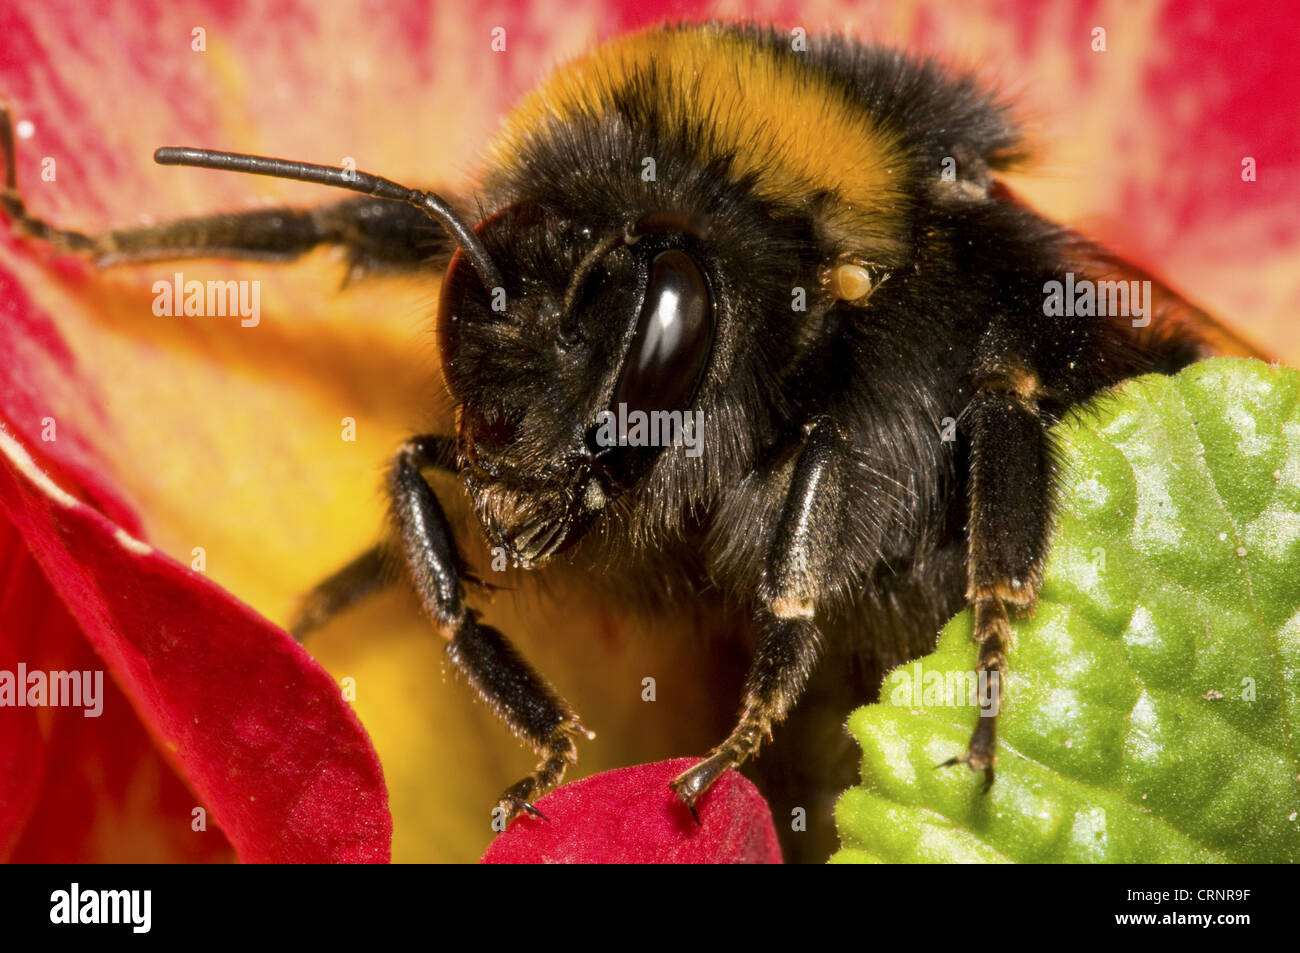 Buff-tailed Bumblebee (Bombus terrestris) adult, with tick on shoulder, emerging from Polyanthus Primrose (Primula polyanthus) Stock Photo